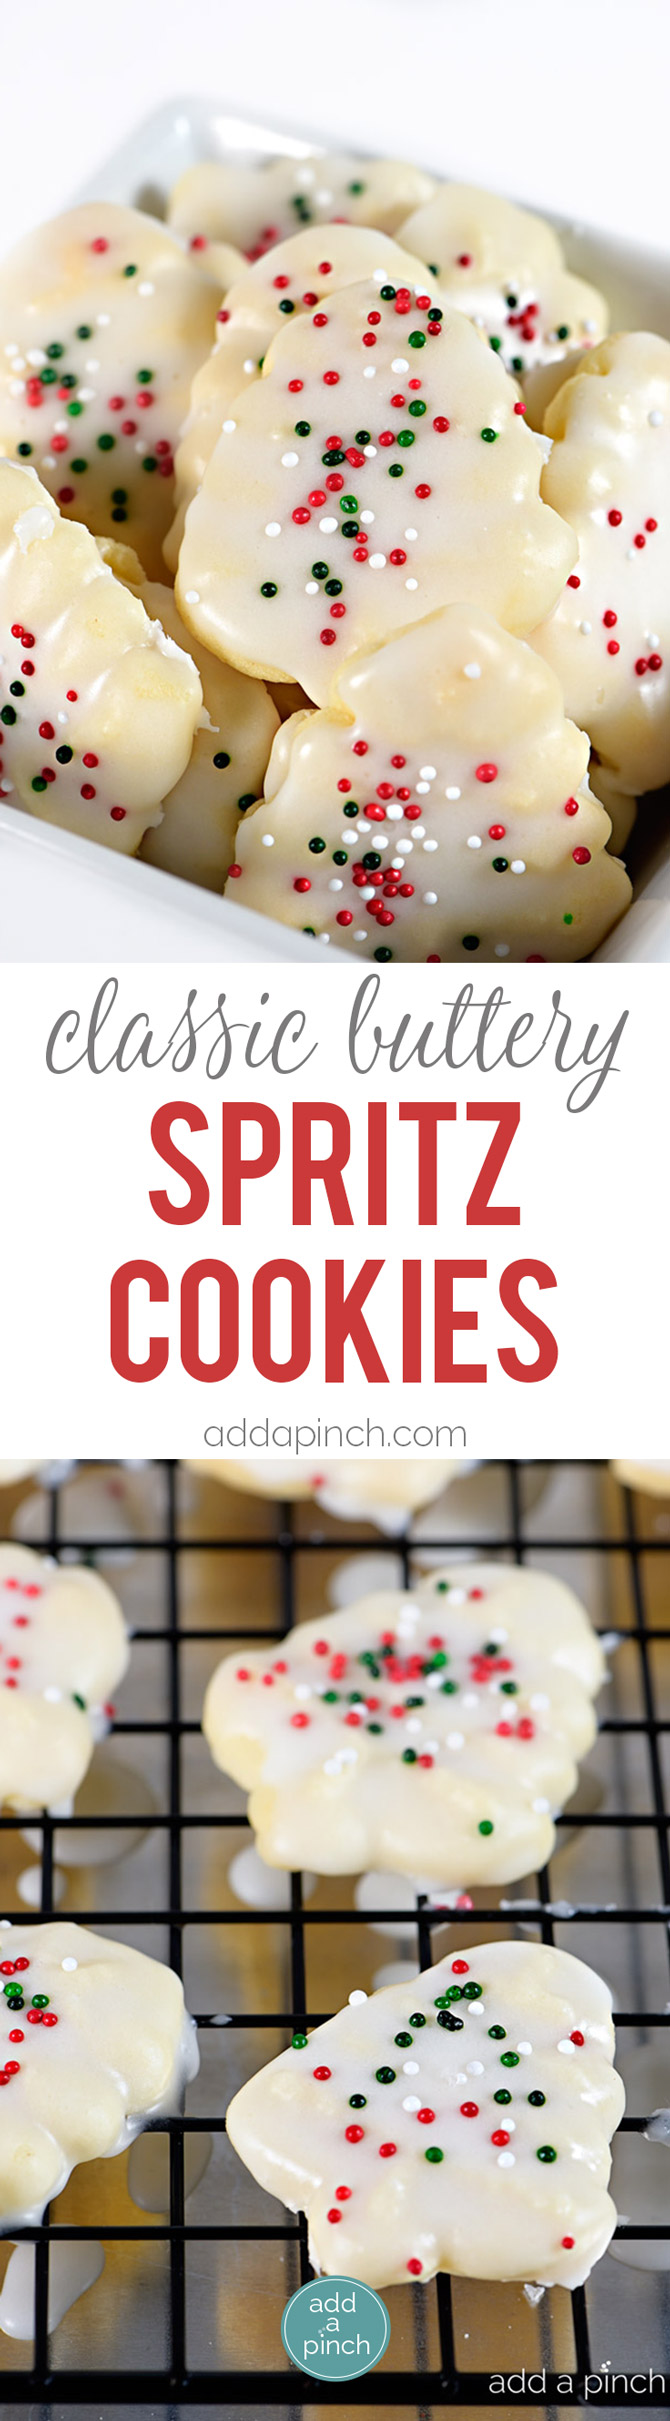 Classic Buttery Spritz Cookies make an easy delicious buttery cookie that comes together quickly! Perfect for special occasions and holidays, these spritz cookies are a favorite! // addapinch.com